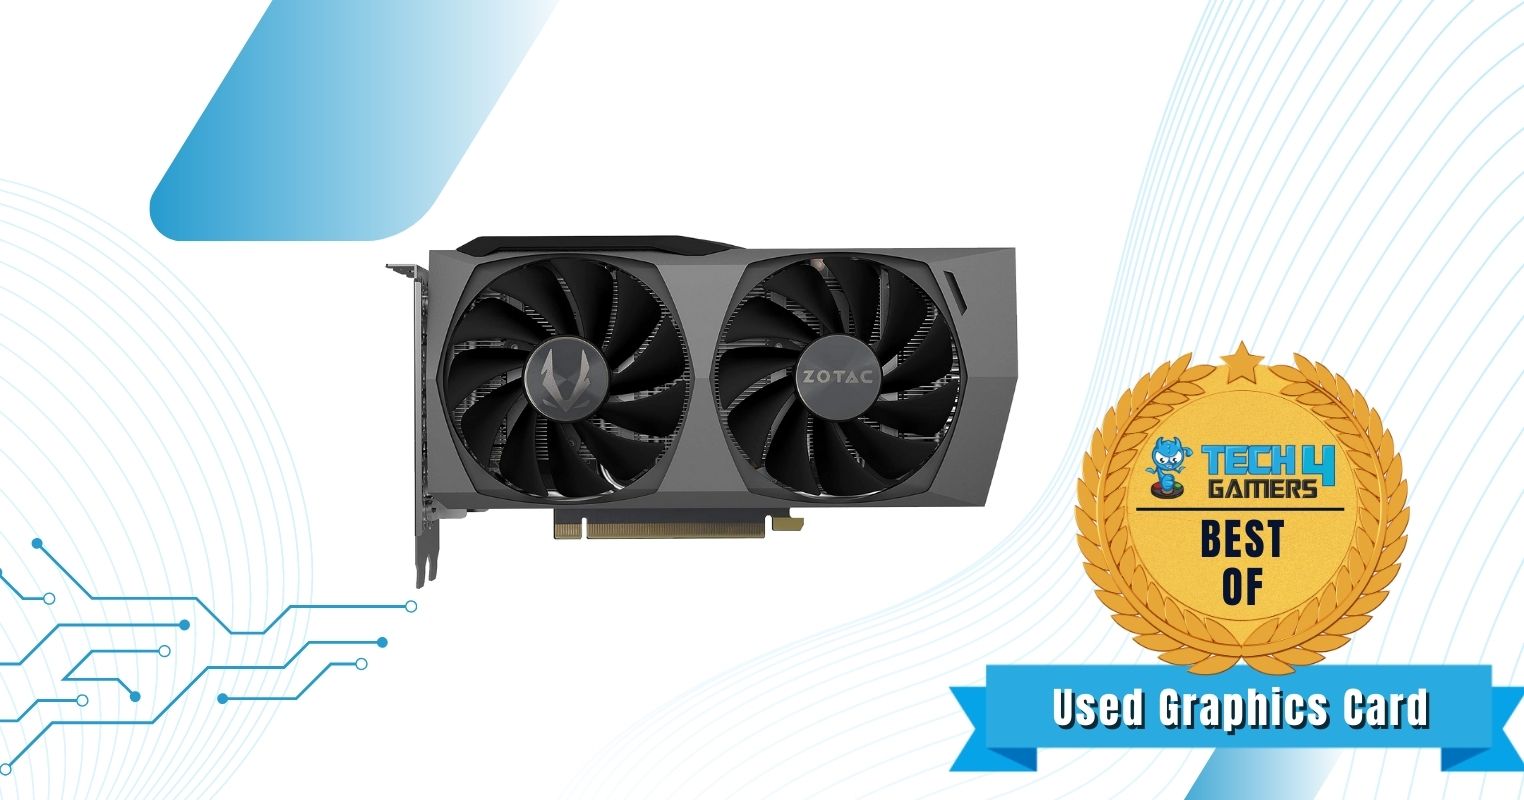 Best Used Graphics Card Under $300 - ZOTAC Gaming GeForce RTX 3060 Ti Twin Edge OC